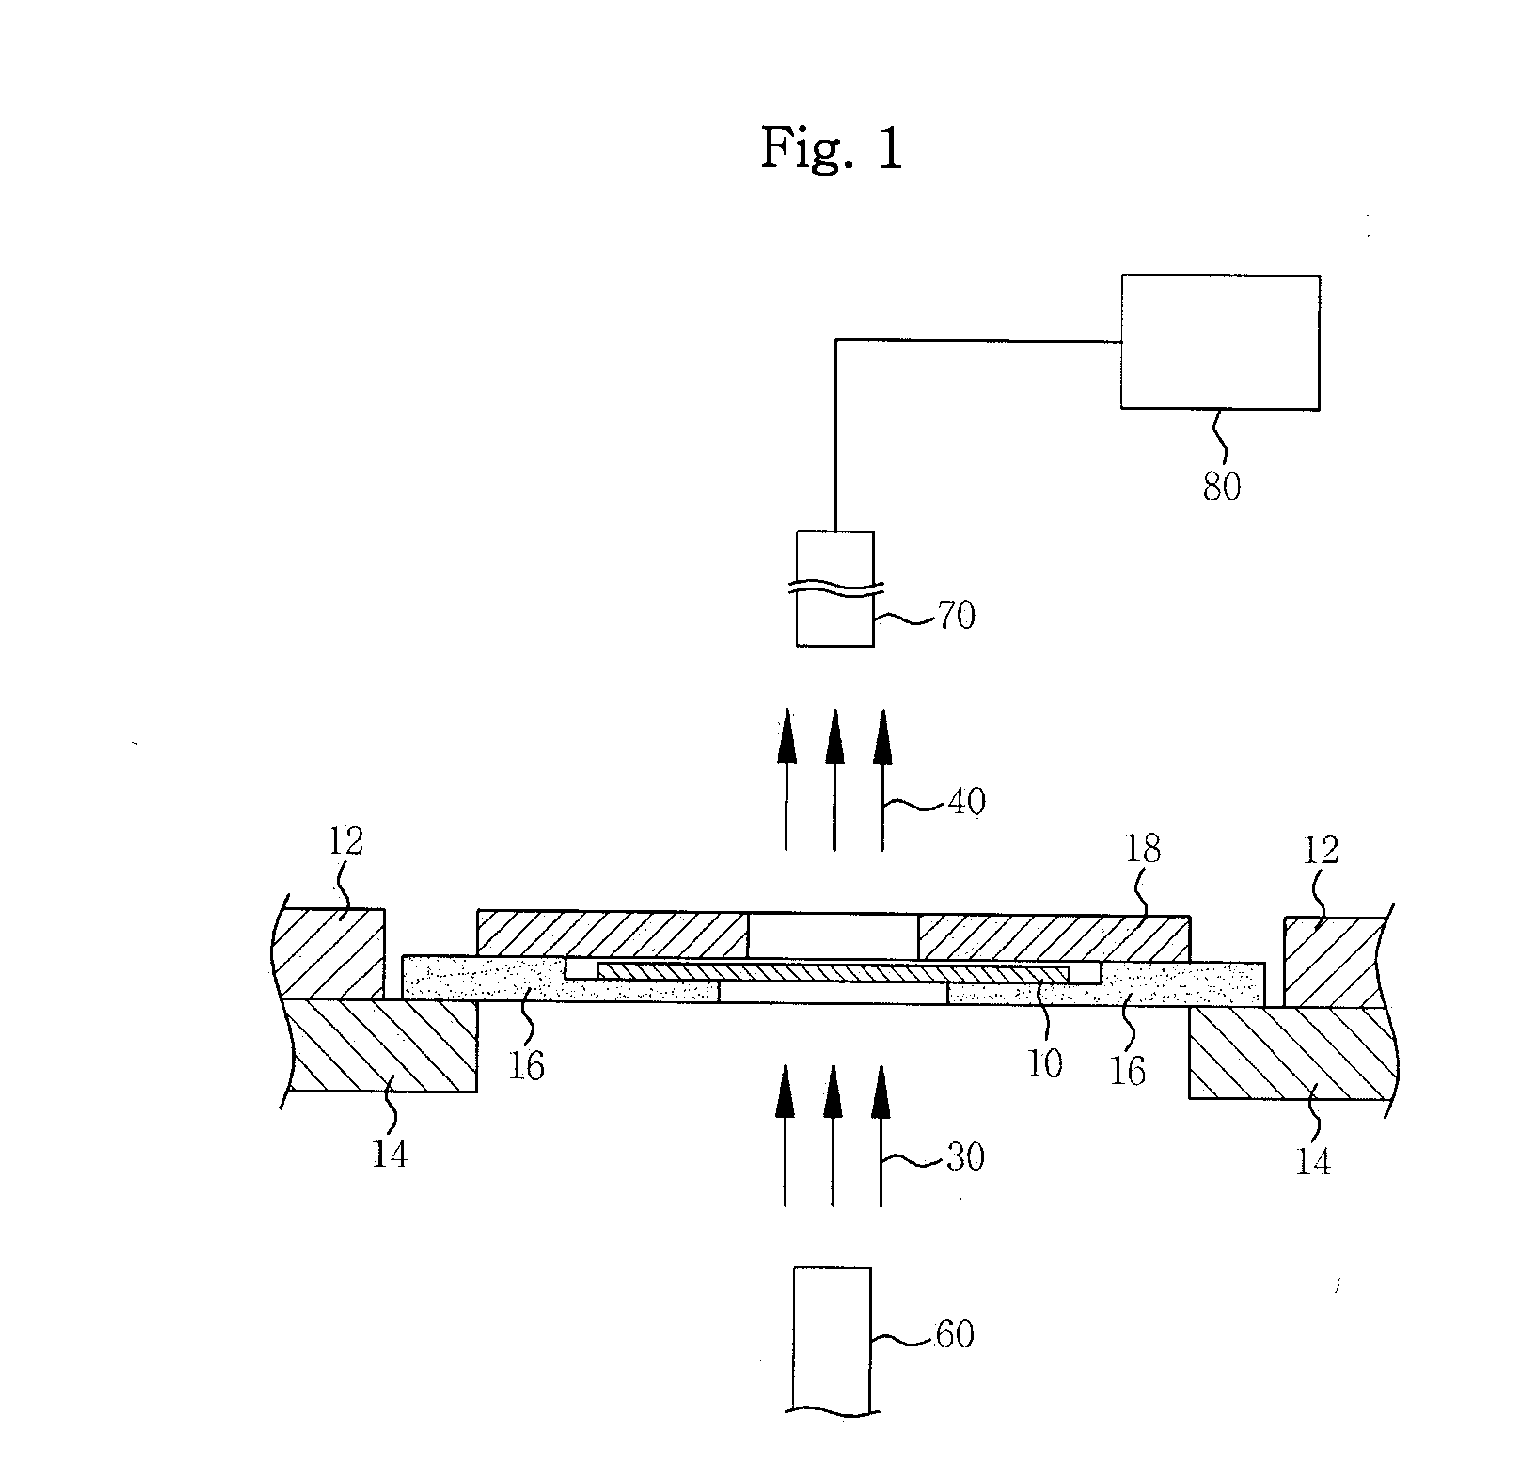 Apparatus and method for measuring thermal diffusivity using the flash method